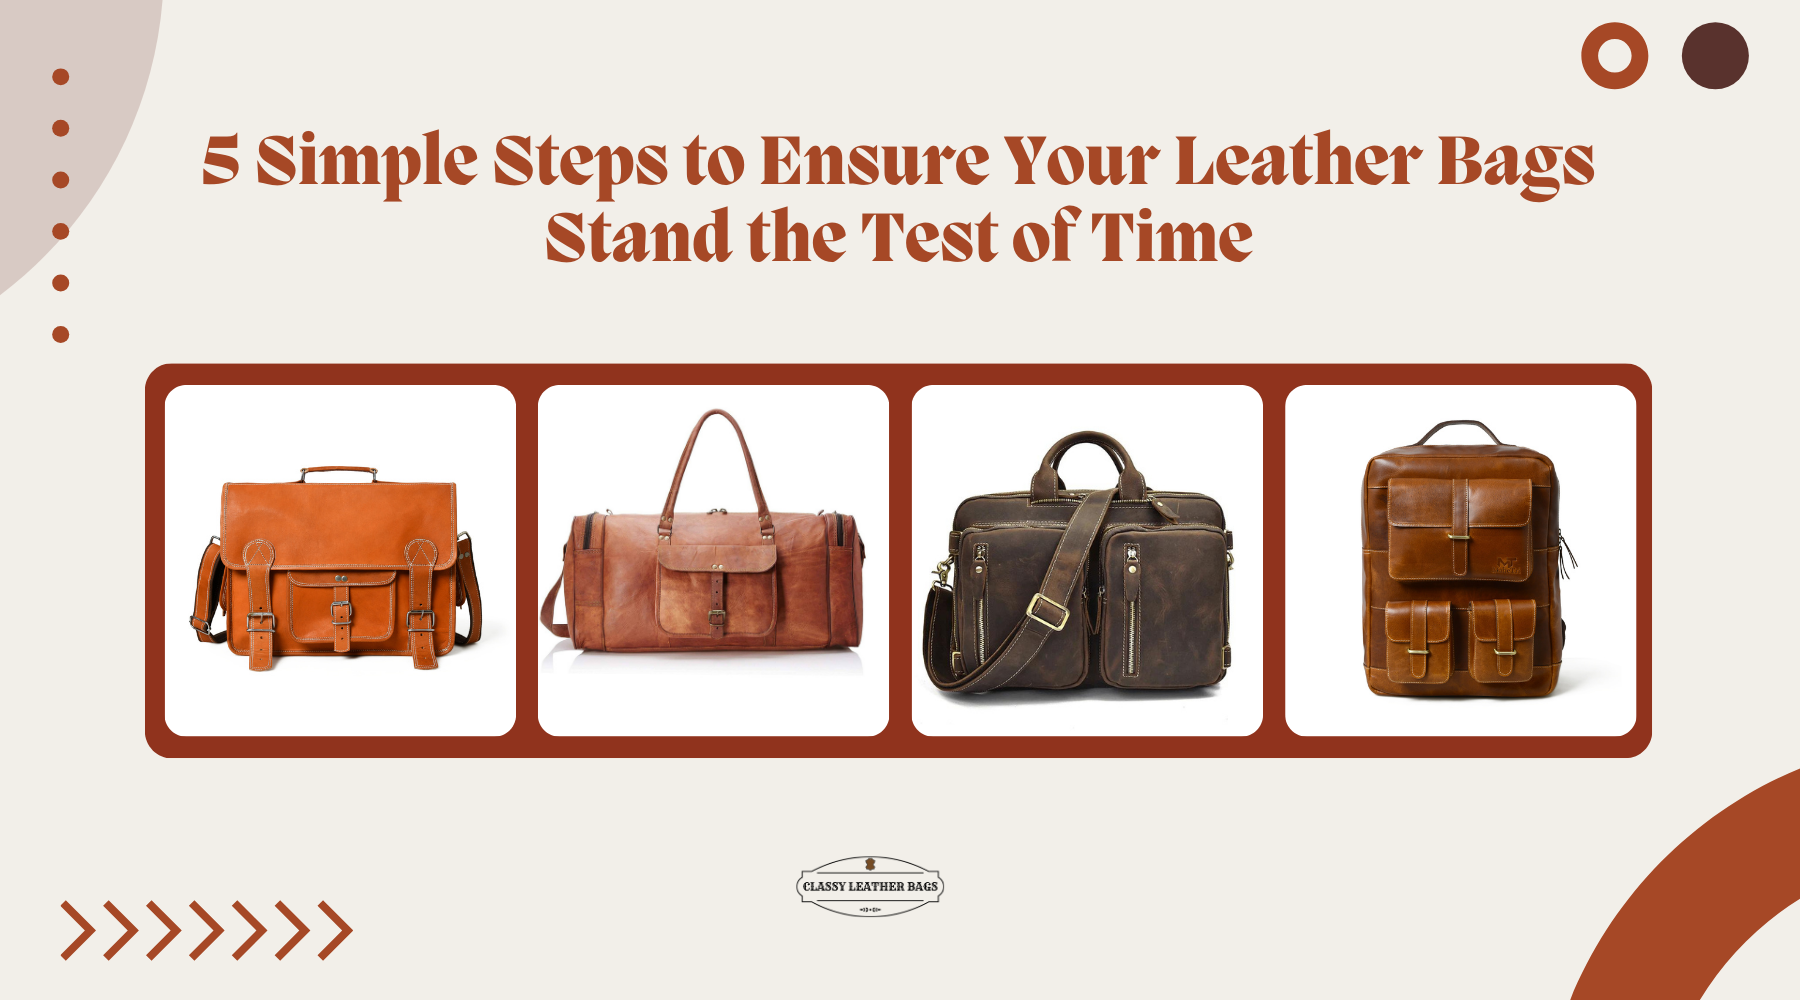 5 Simple Steps to Ensure Your Leather Bags Stand the Test of Time